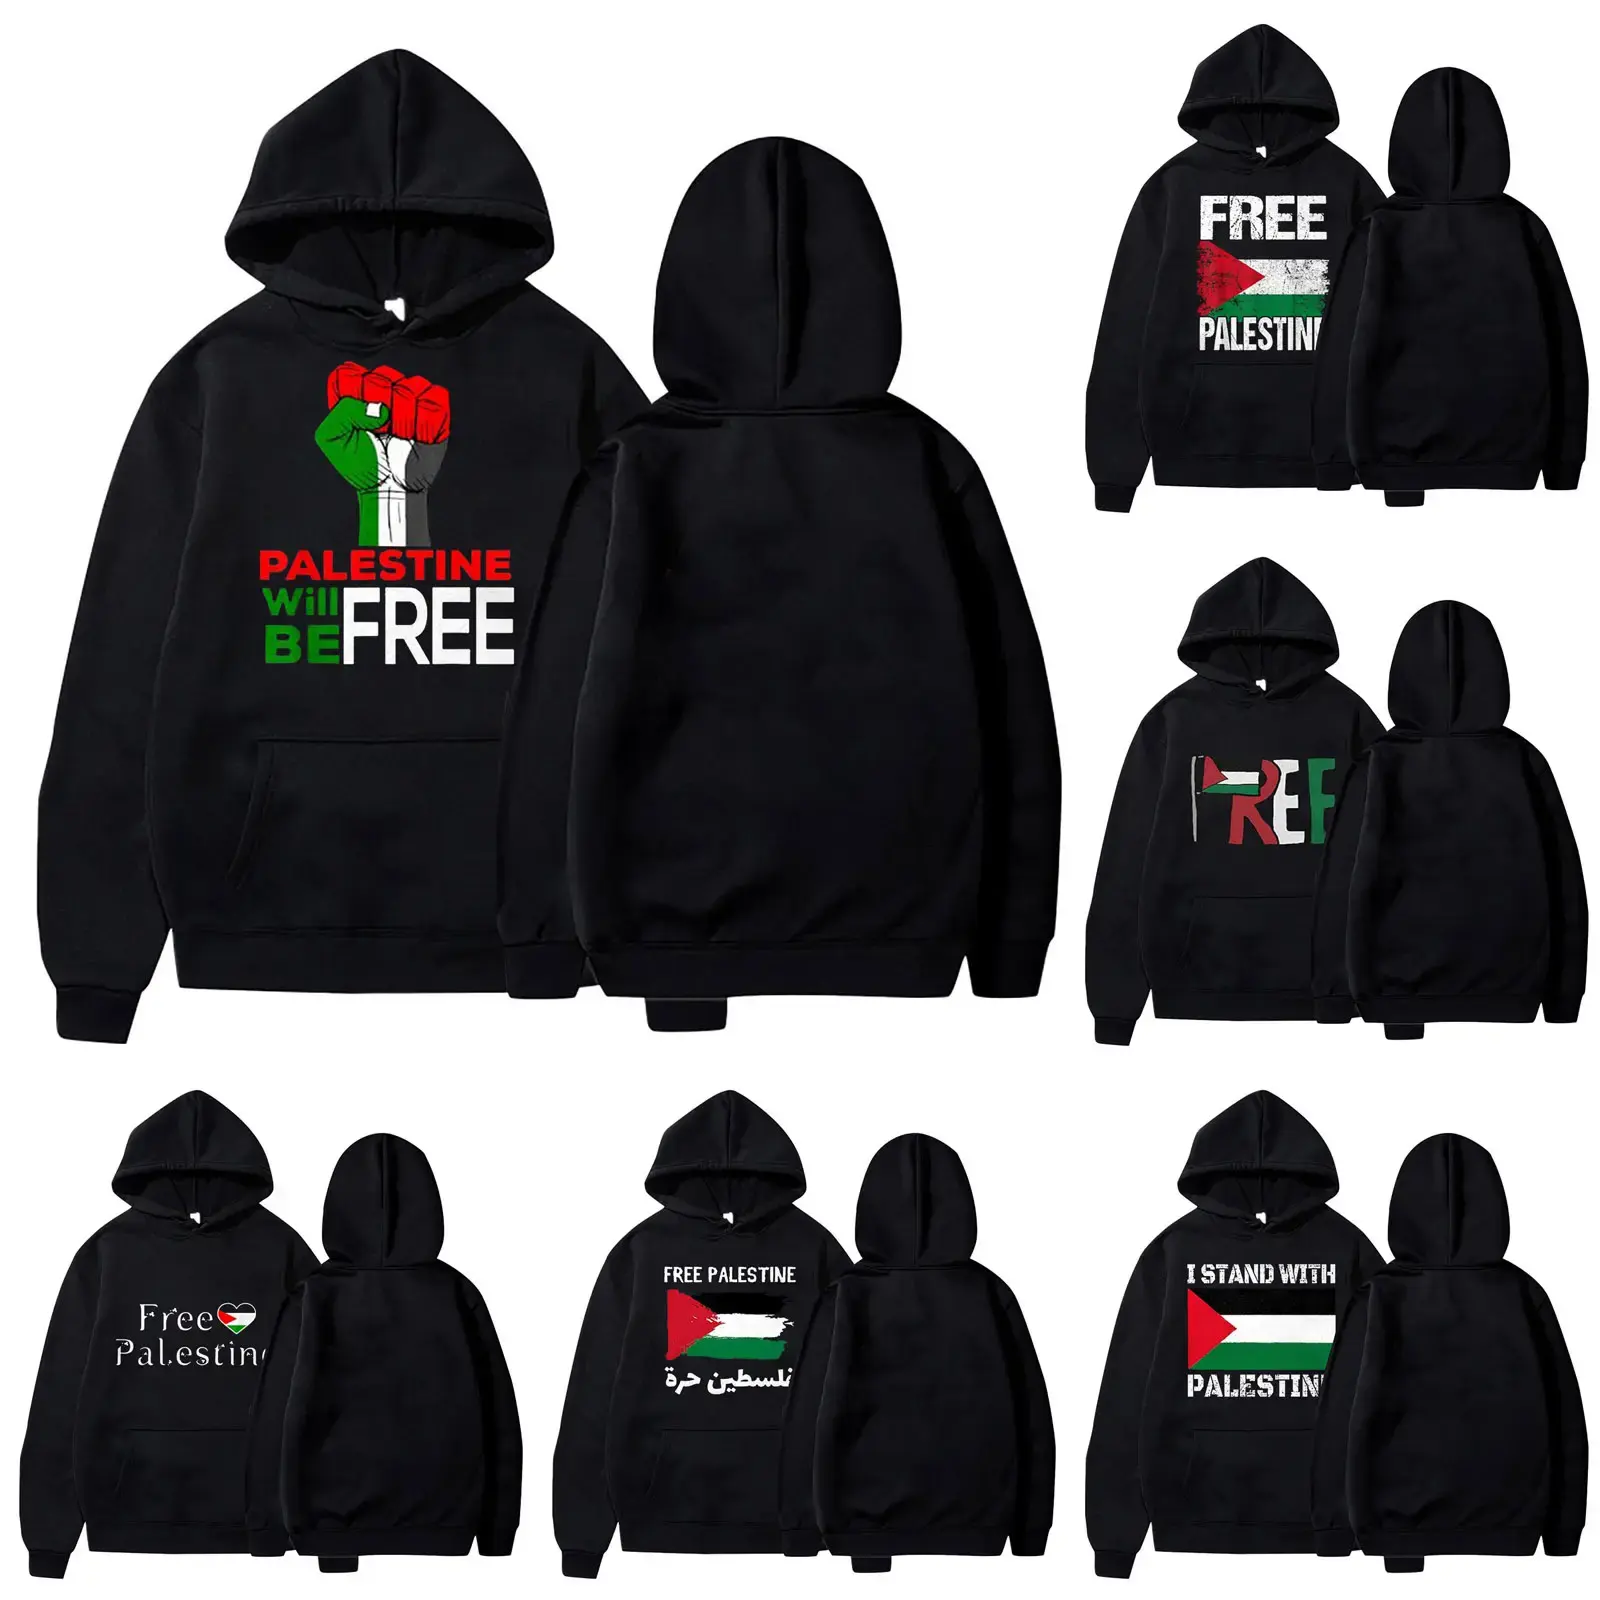 Excellent Quality Custom Design Size Sublimation Polyester Digital Printing Long Sleeve Free Palestine Unisex Hoodies